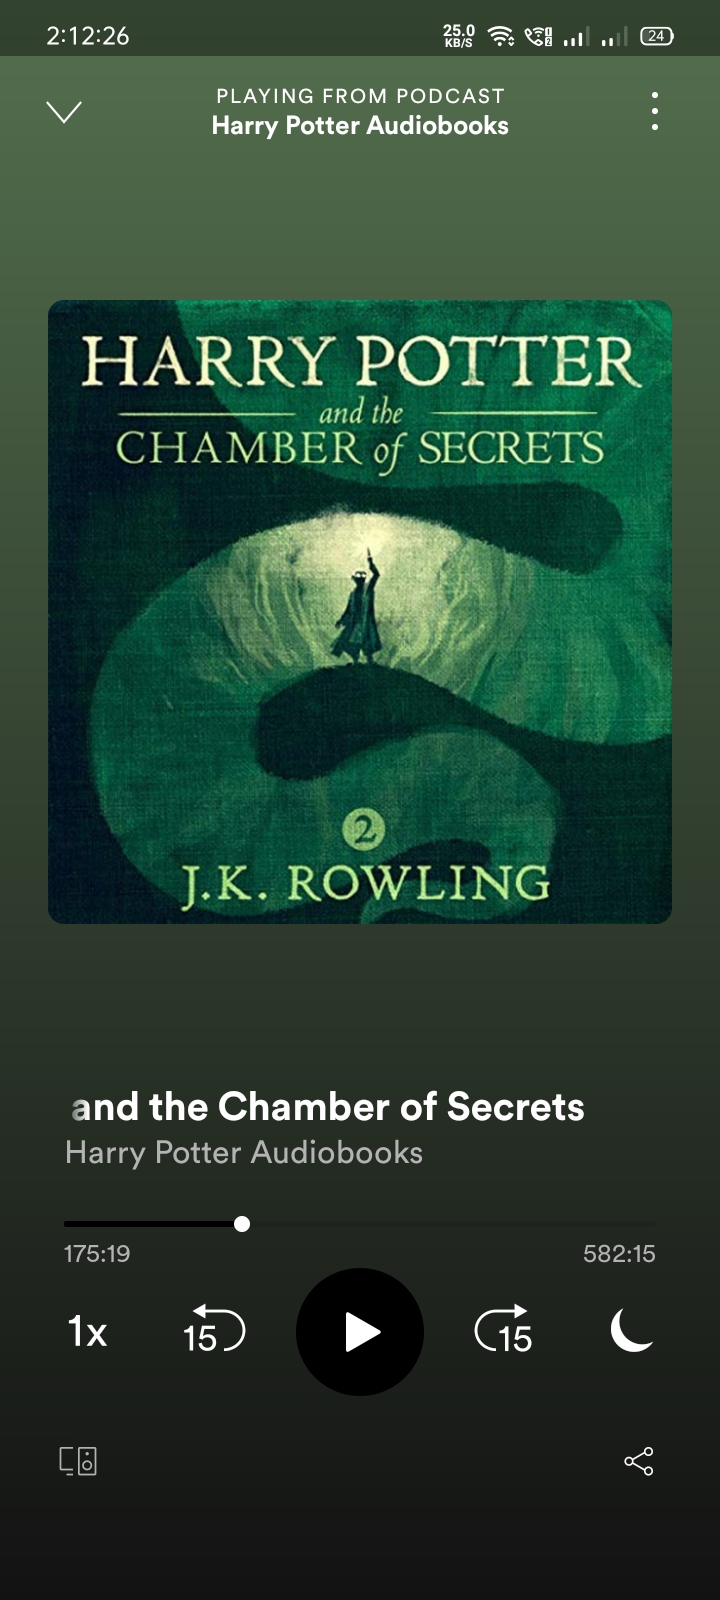 Are the Harry Potter audiobooks available on Spotify?